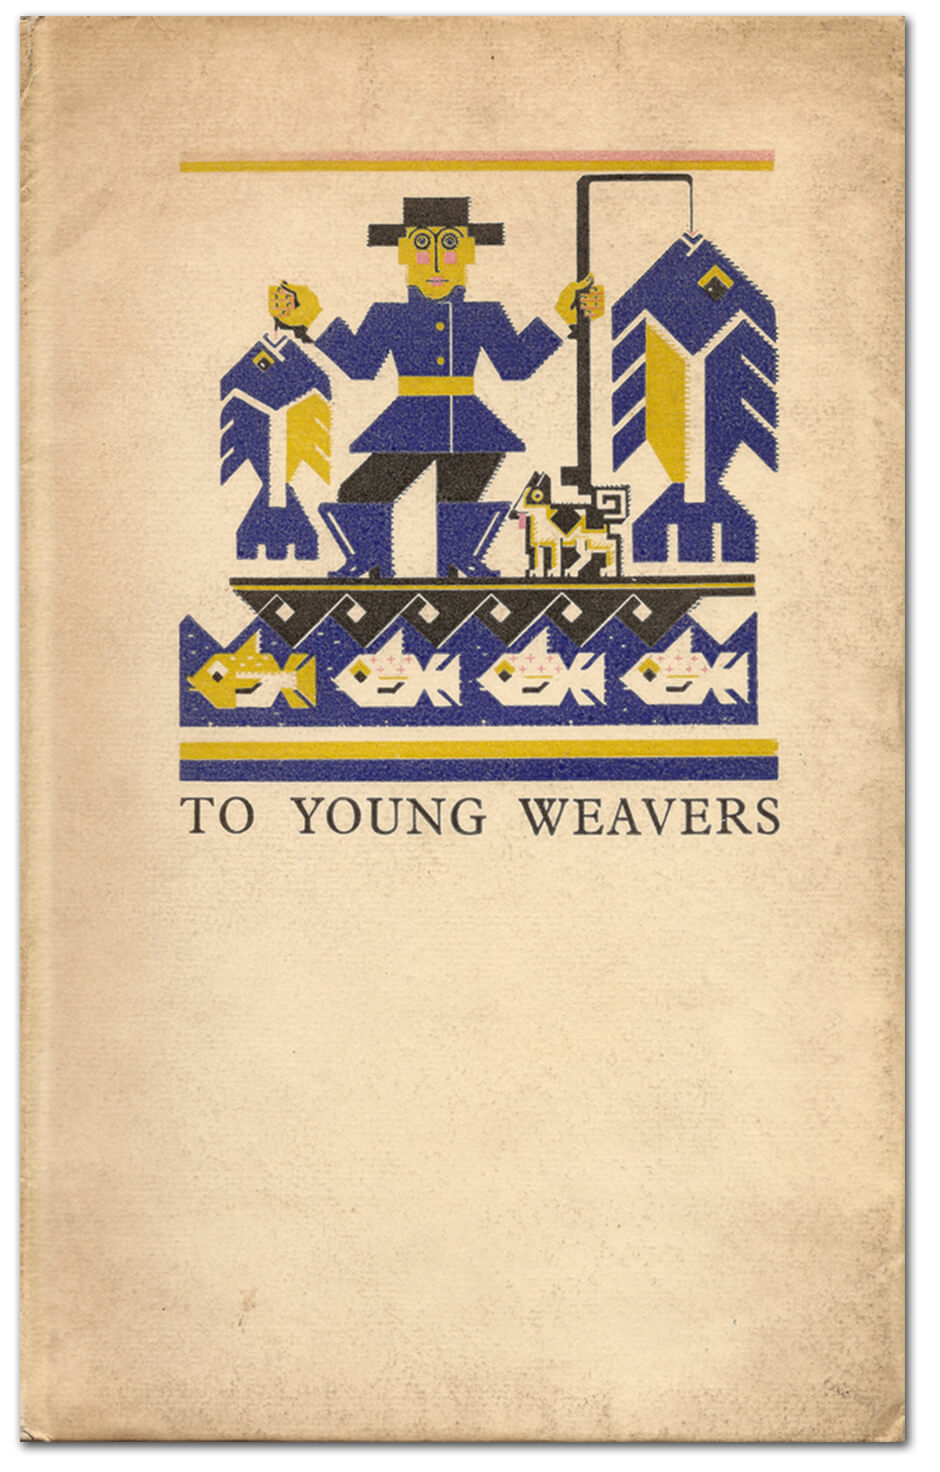 Art Canada Institute, Jock Macdonald, To Young Weavers; being some practical dreams on the future of textiles, by James Morton, 1927